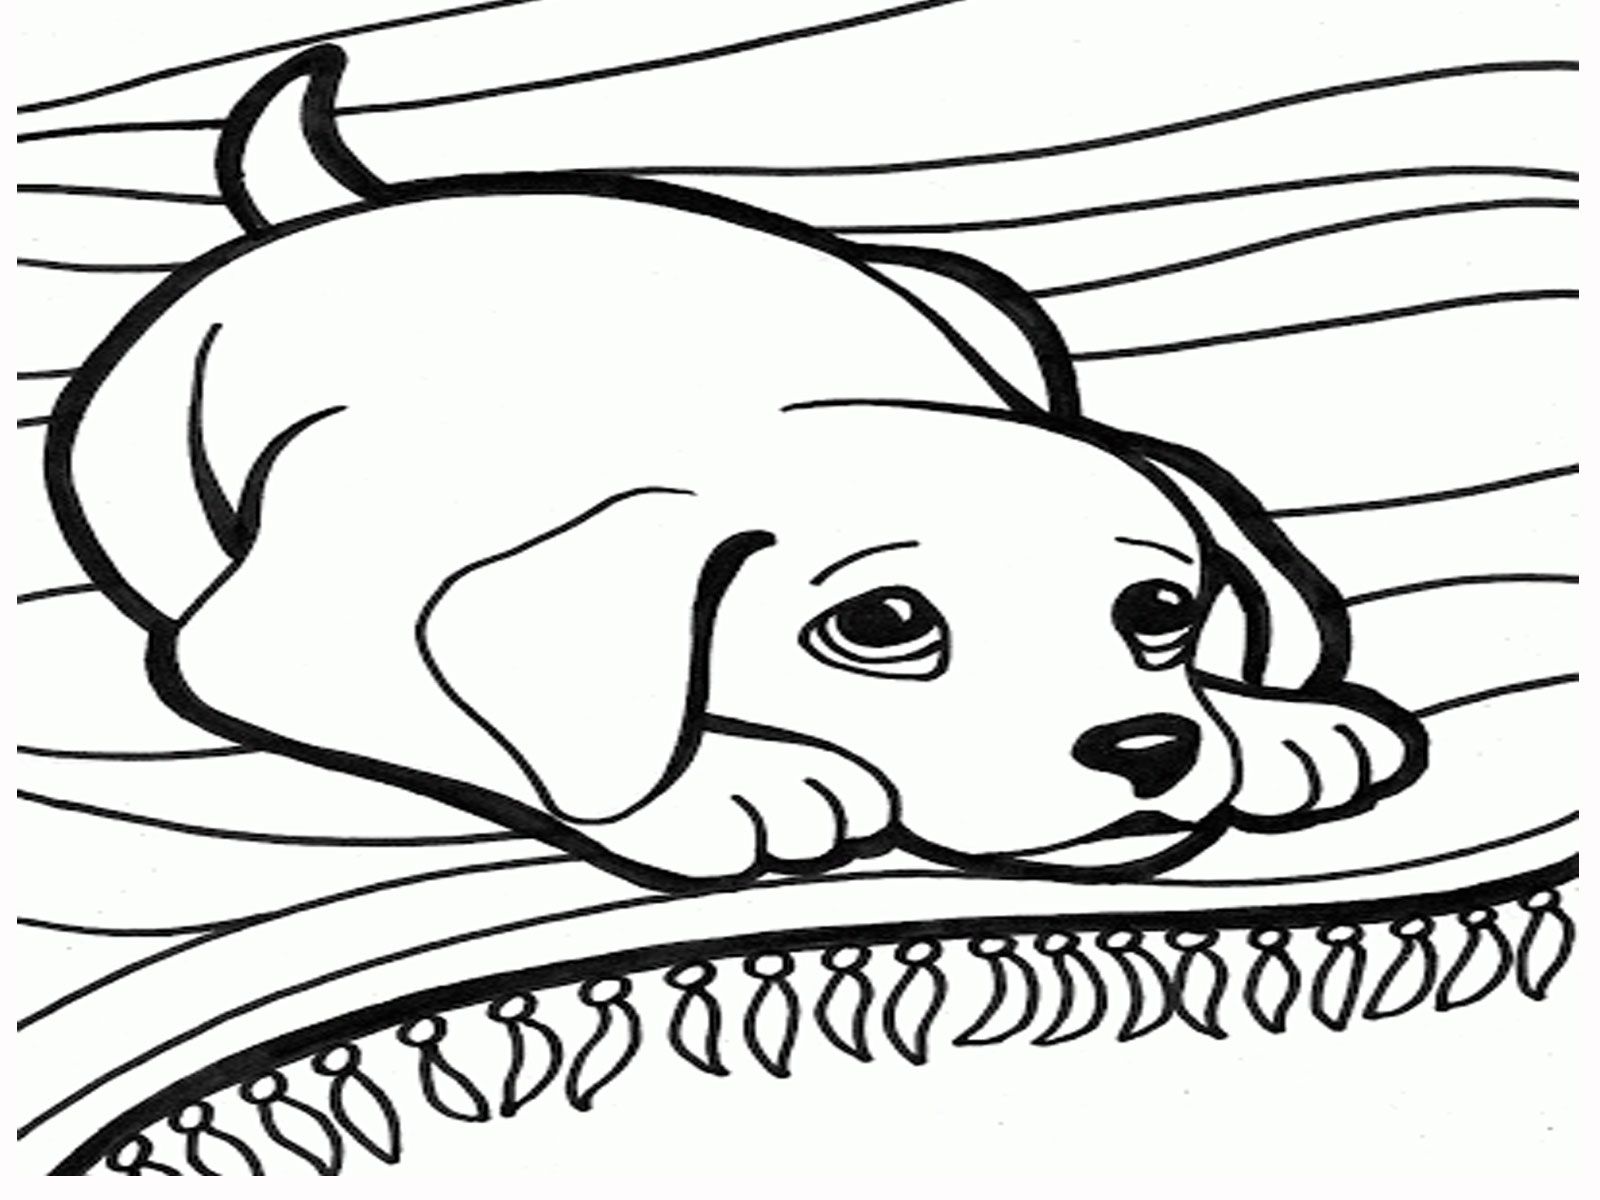 Easy Dog Coloring Pages For Girls Coloring Pages Dogs Coloring